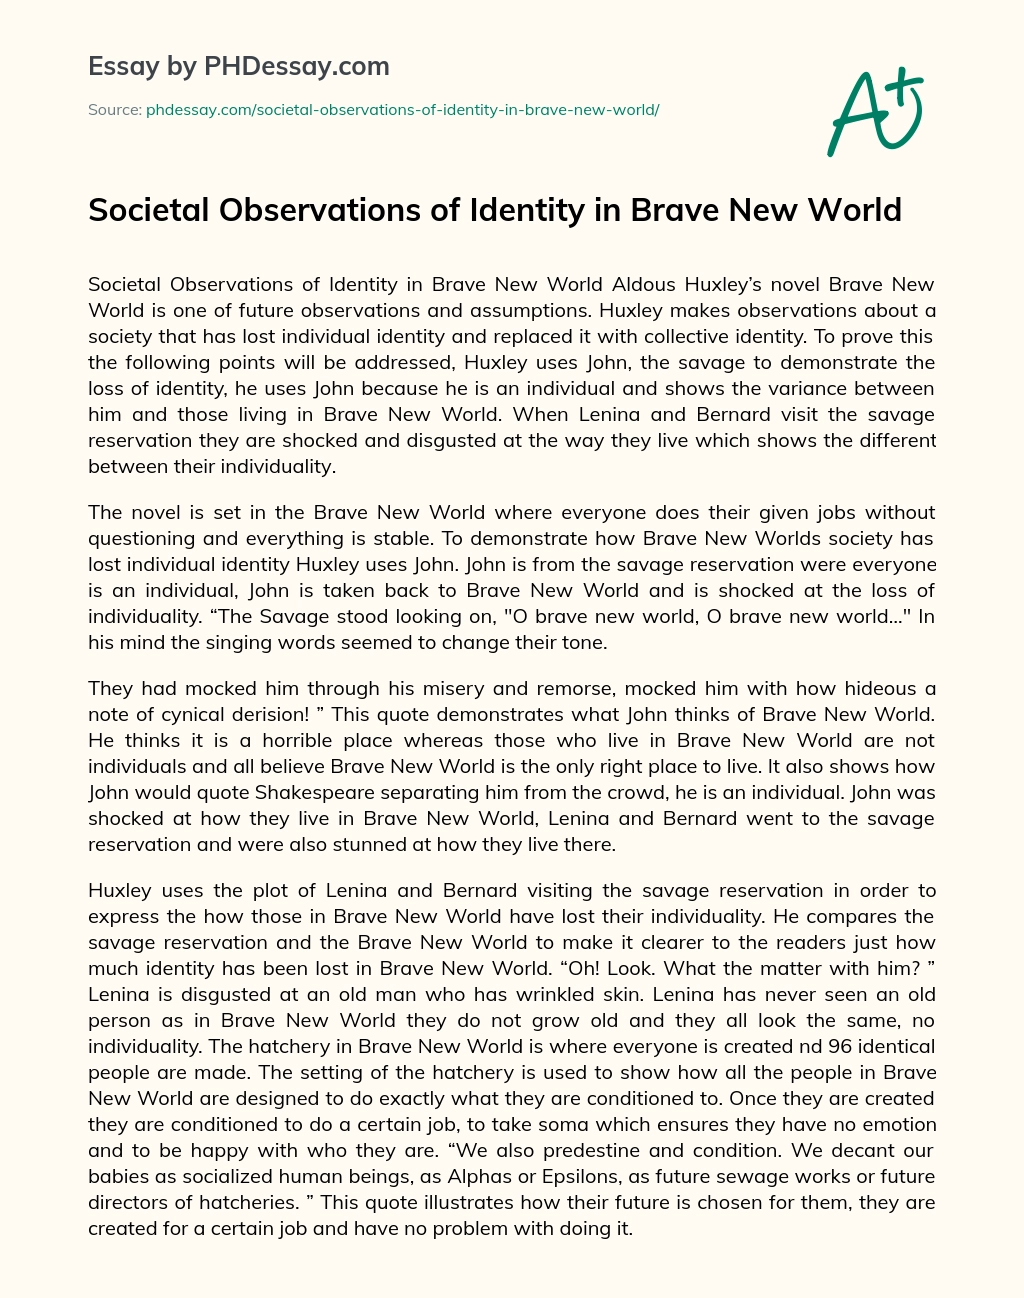 Societal Observations of Identity in Brave New World essay